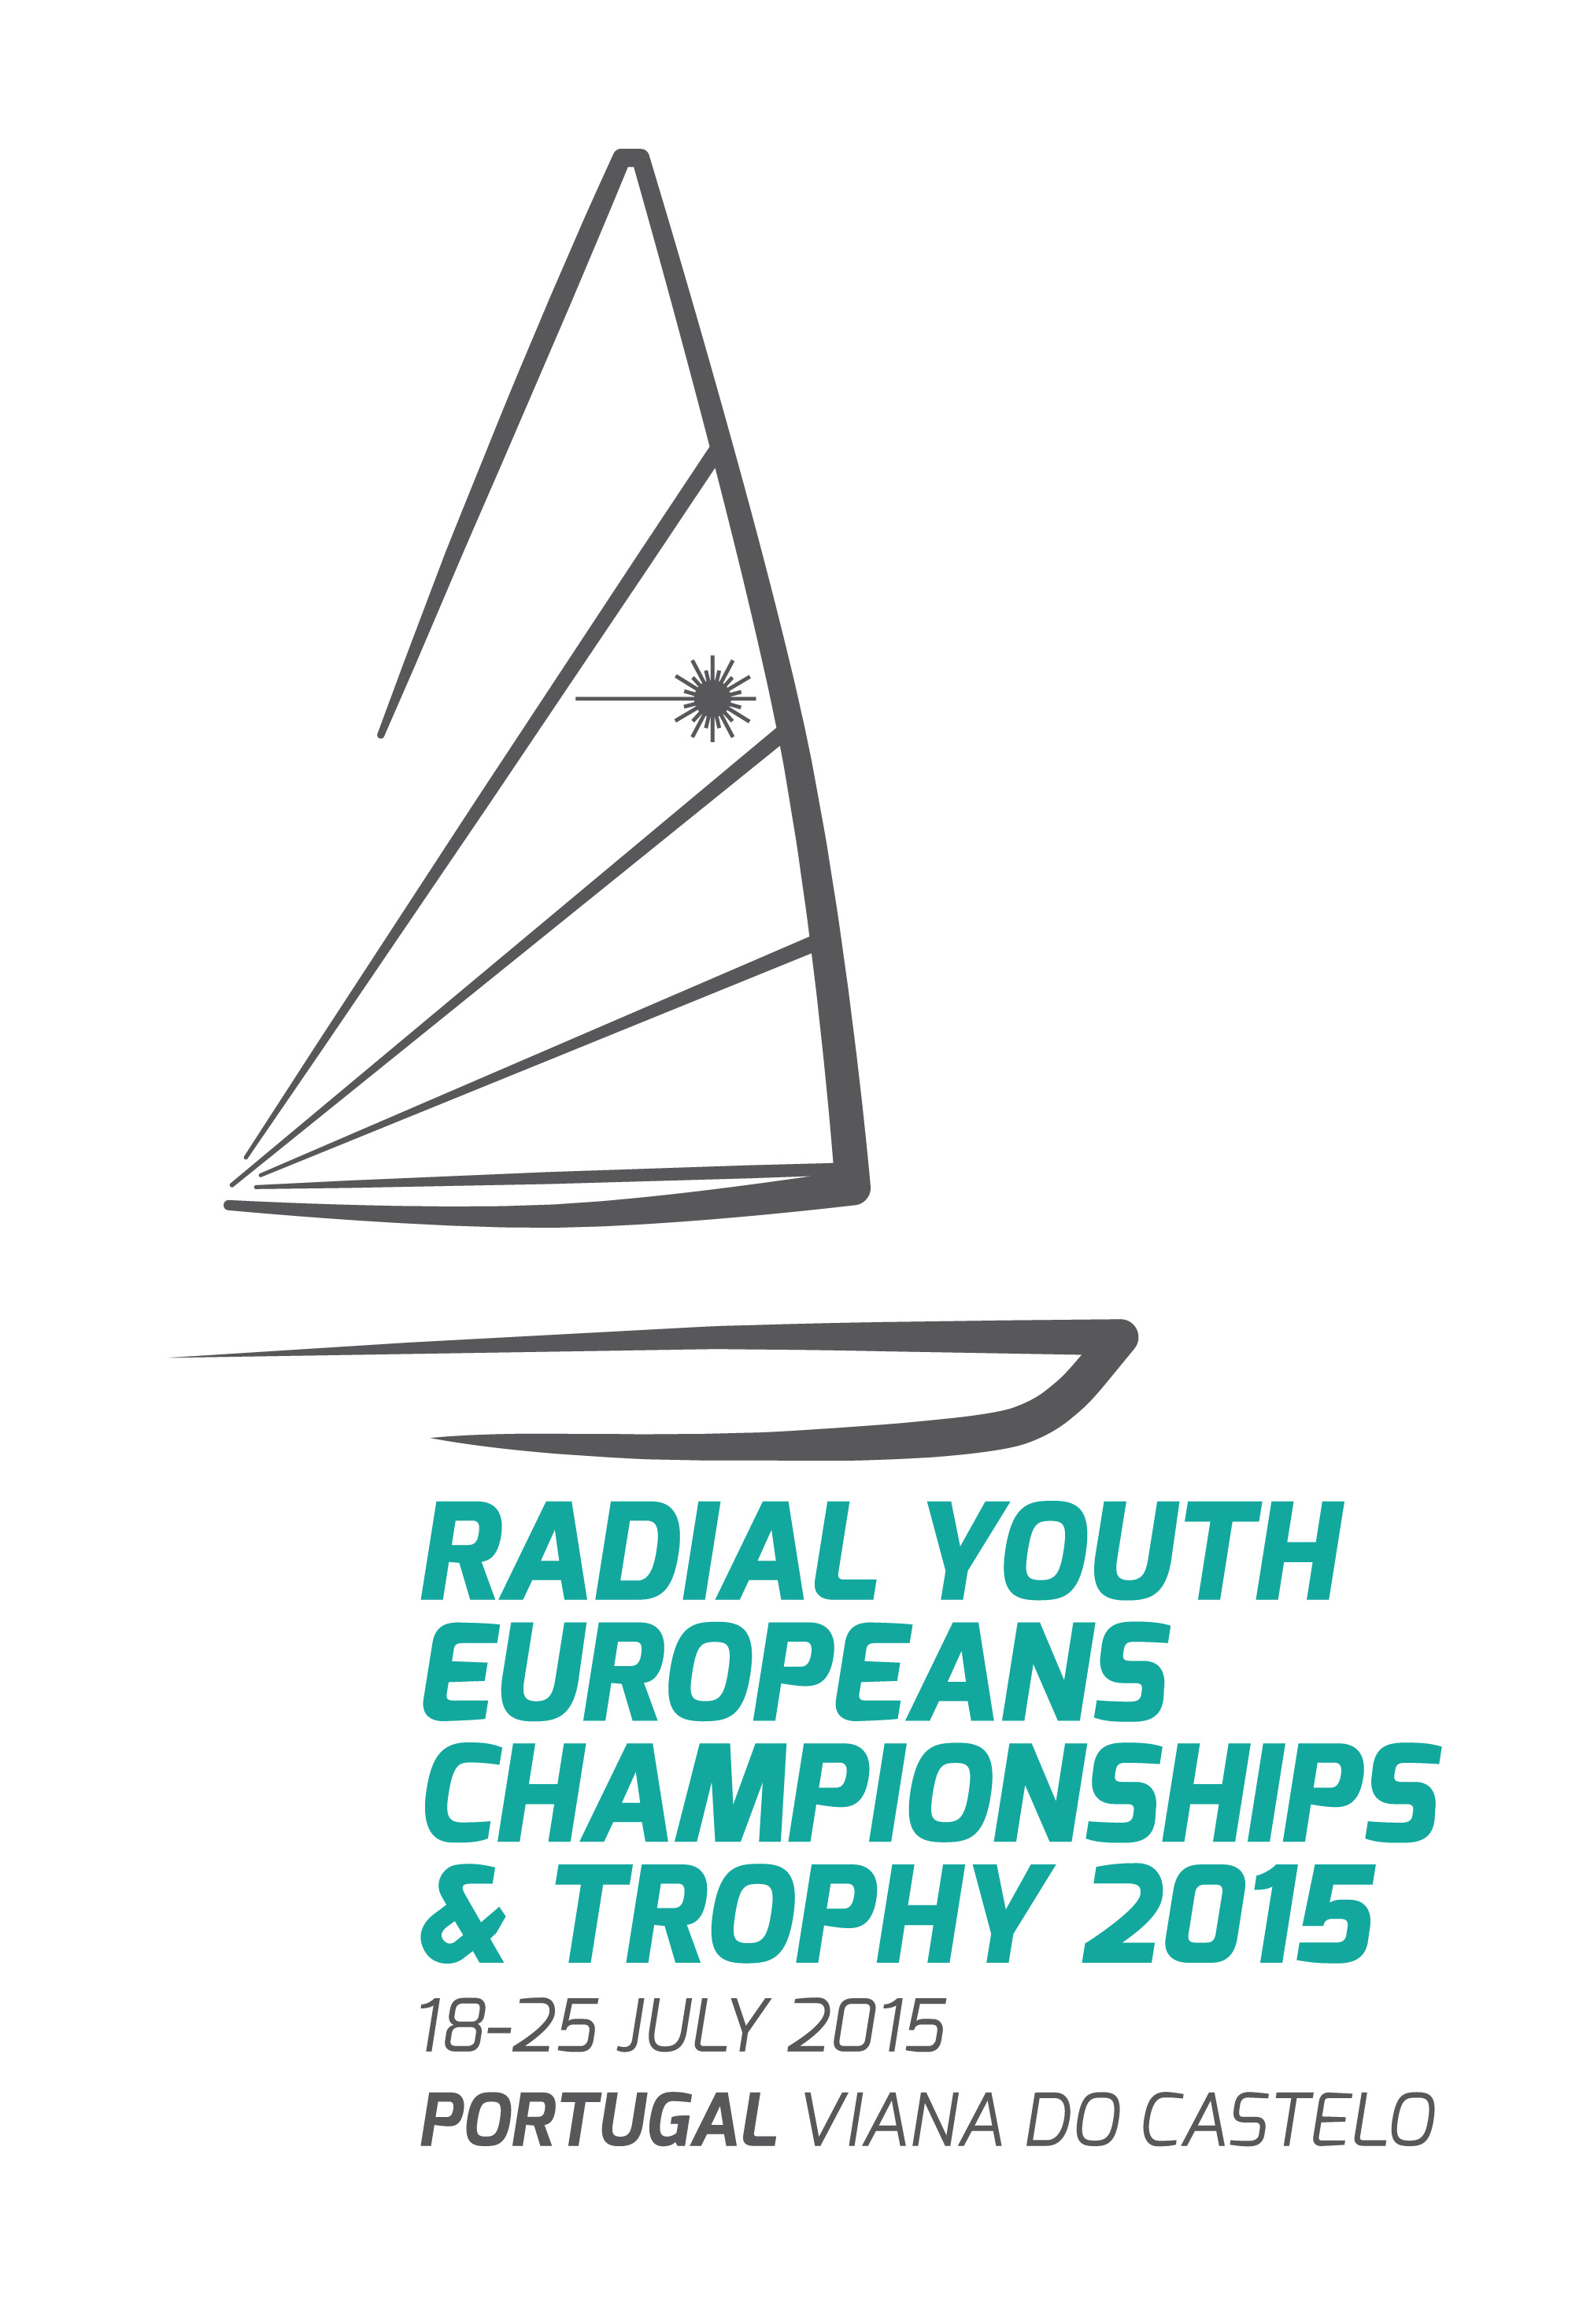 Radial Youth Europeans championships & Trophy 2015